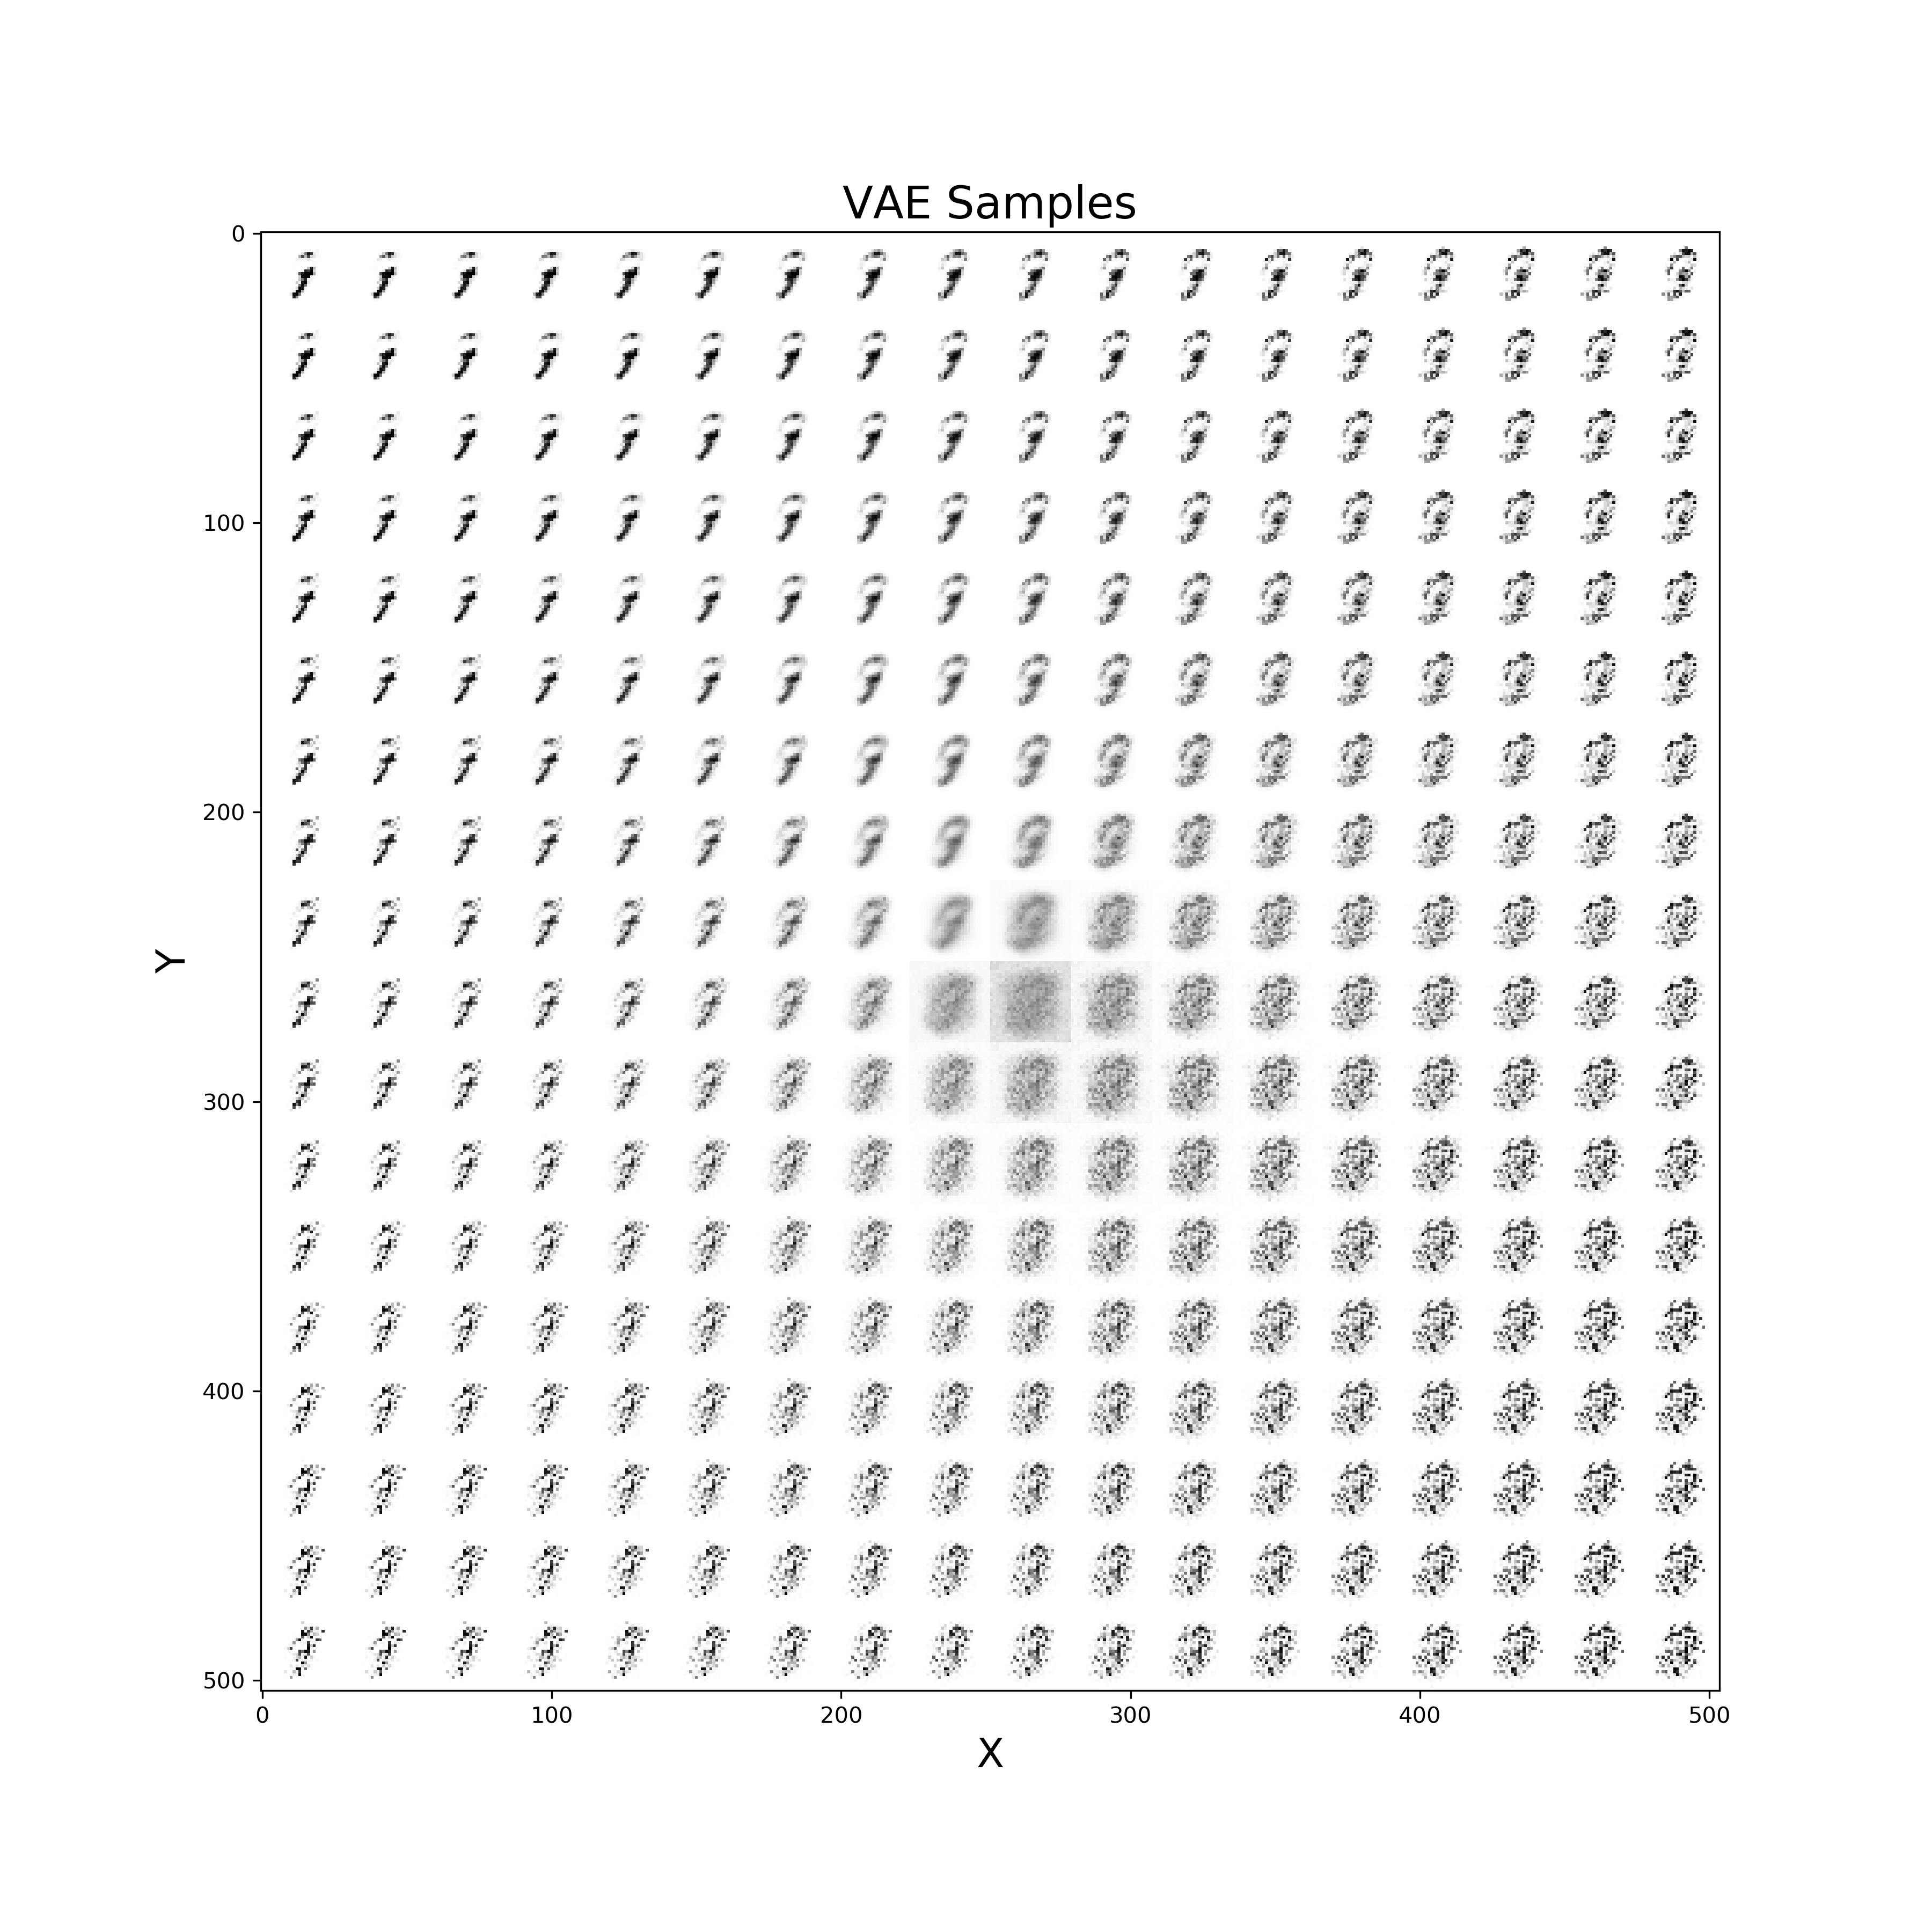 Figure 10: VAE improvement over time to create new digits